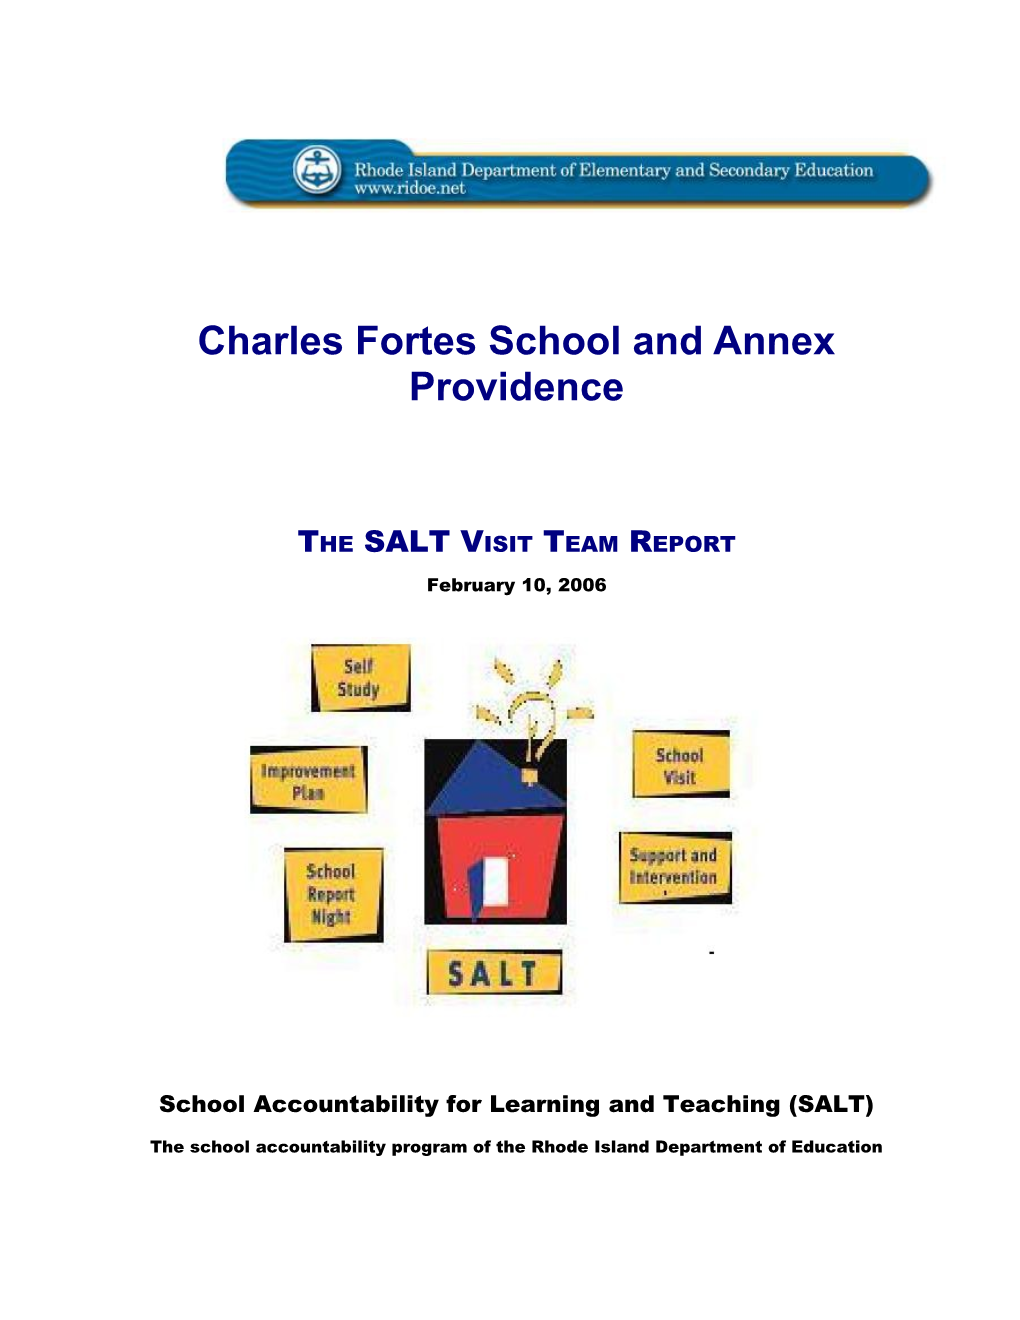 Charles Fortes School and Annex Providence